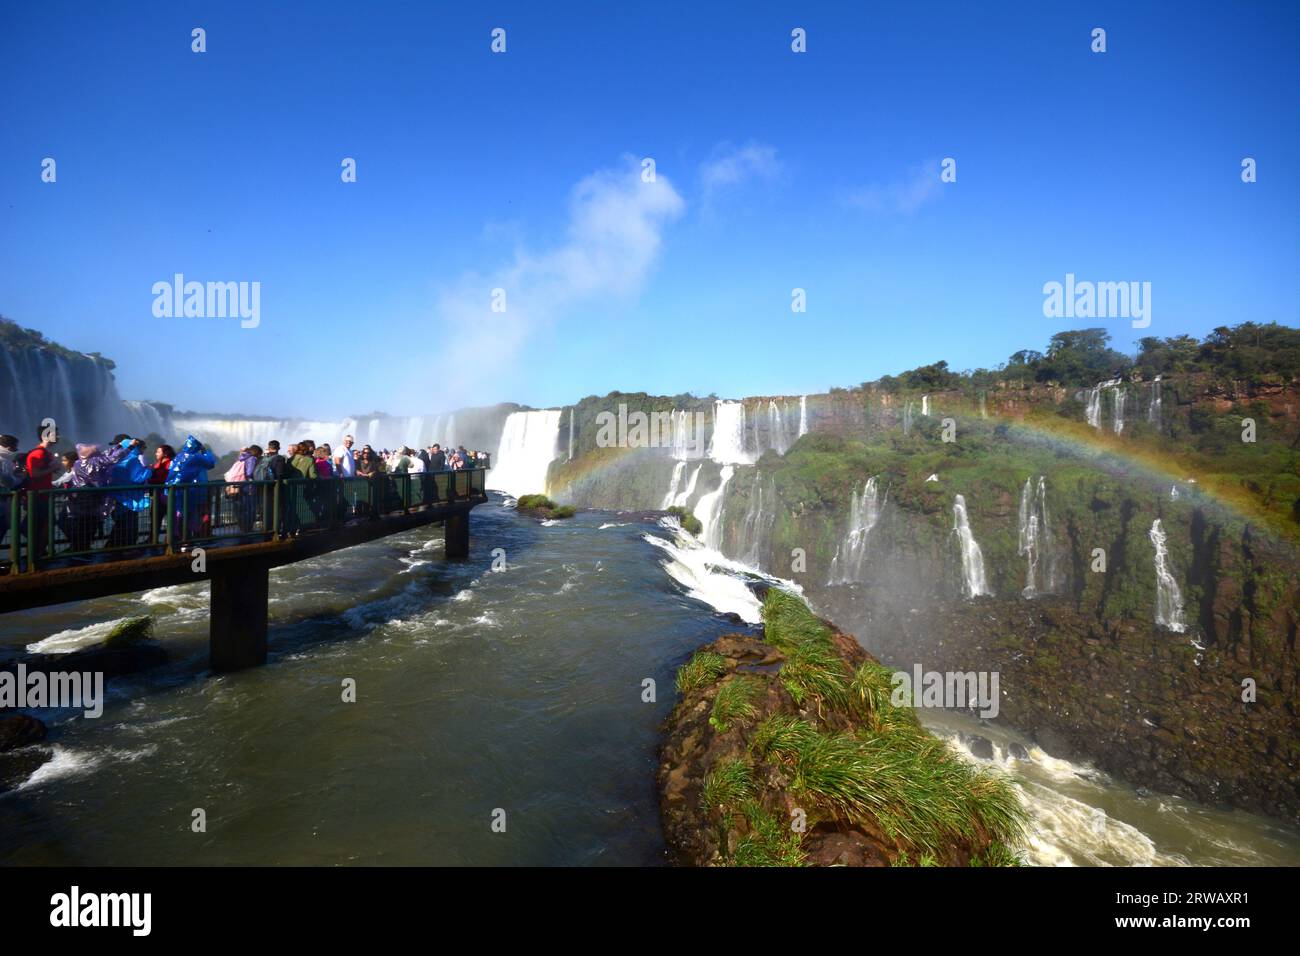 Tourists at Iguazu Falls, one of the great natural wonders of the world, on the border of Brazil and Argentina with a rainbow on the right. Stock Photo